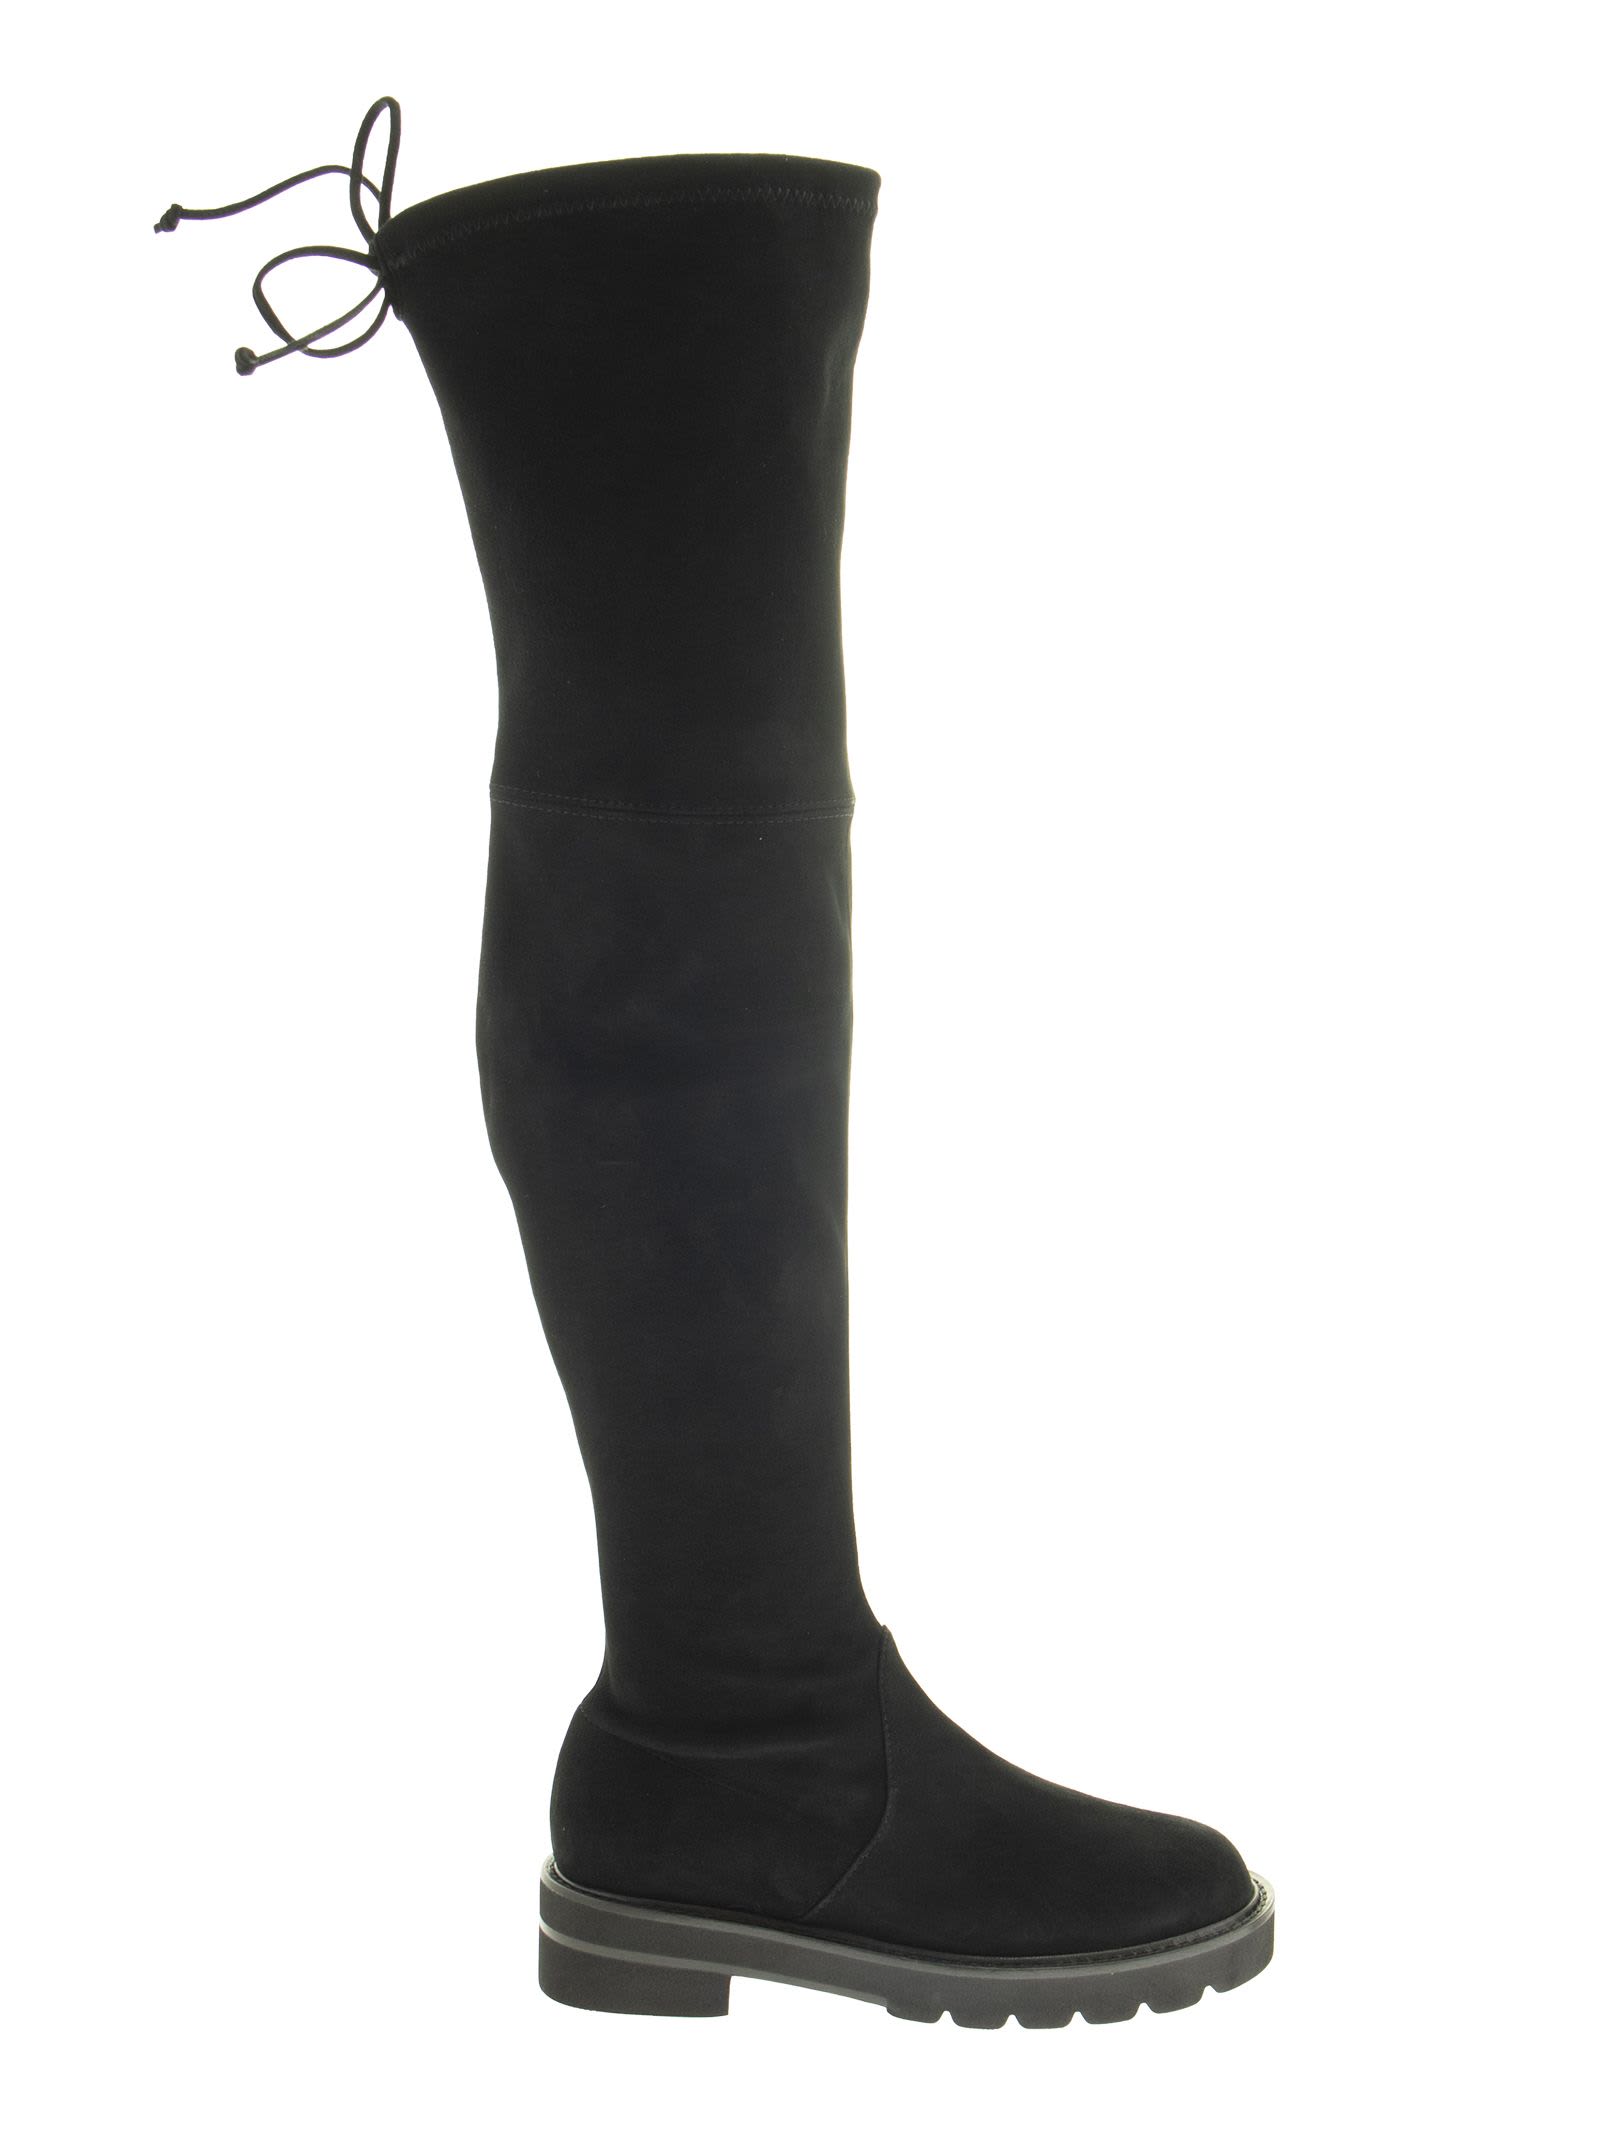 Buy Stuart Weitzman Lowland Lift - Suede Boot Over The Knee online, shop Stuart Weitzman shoes with free shipping